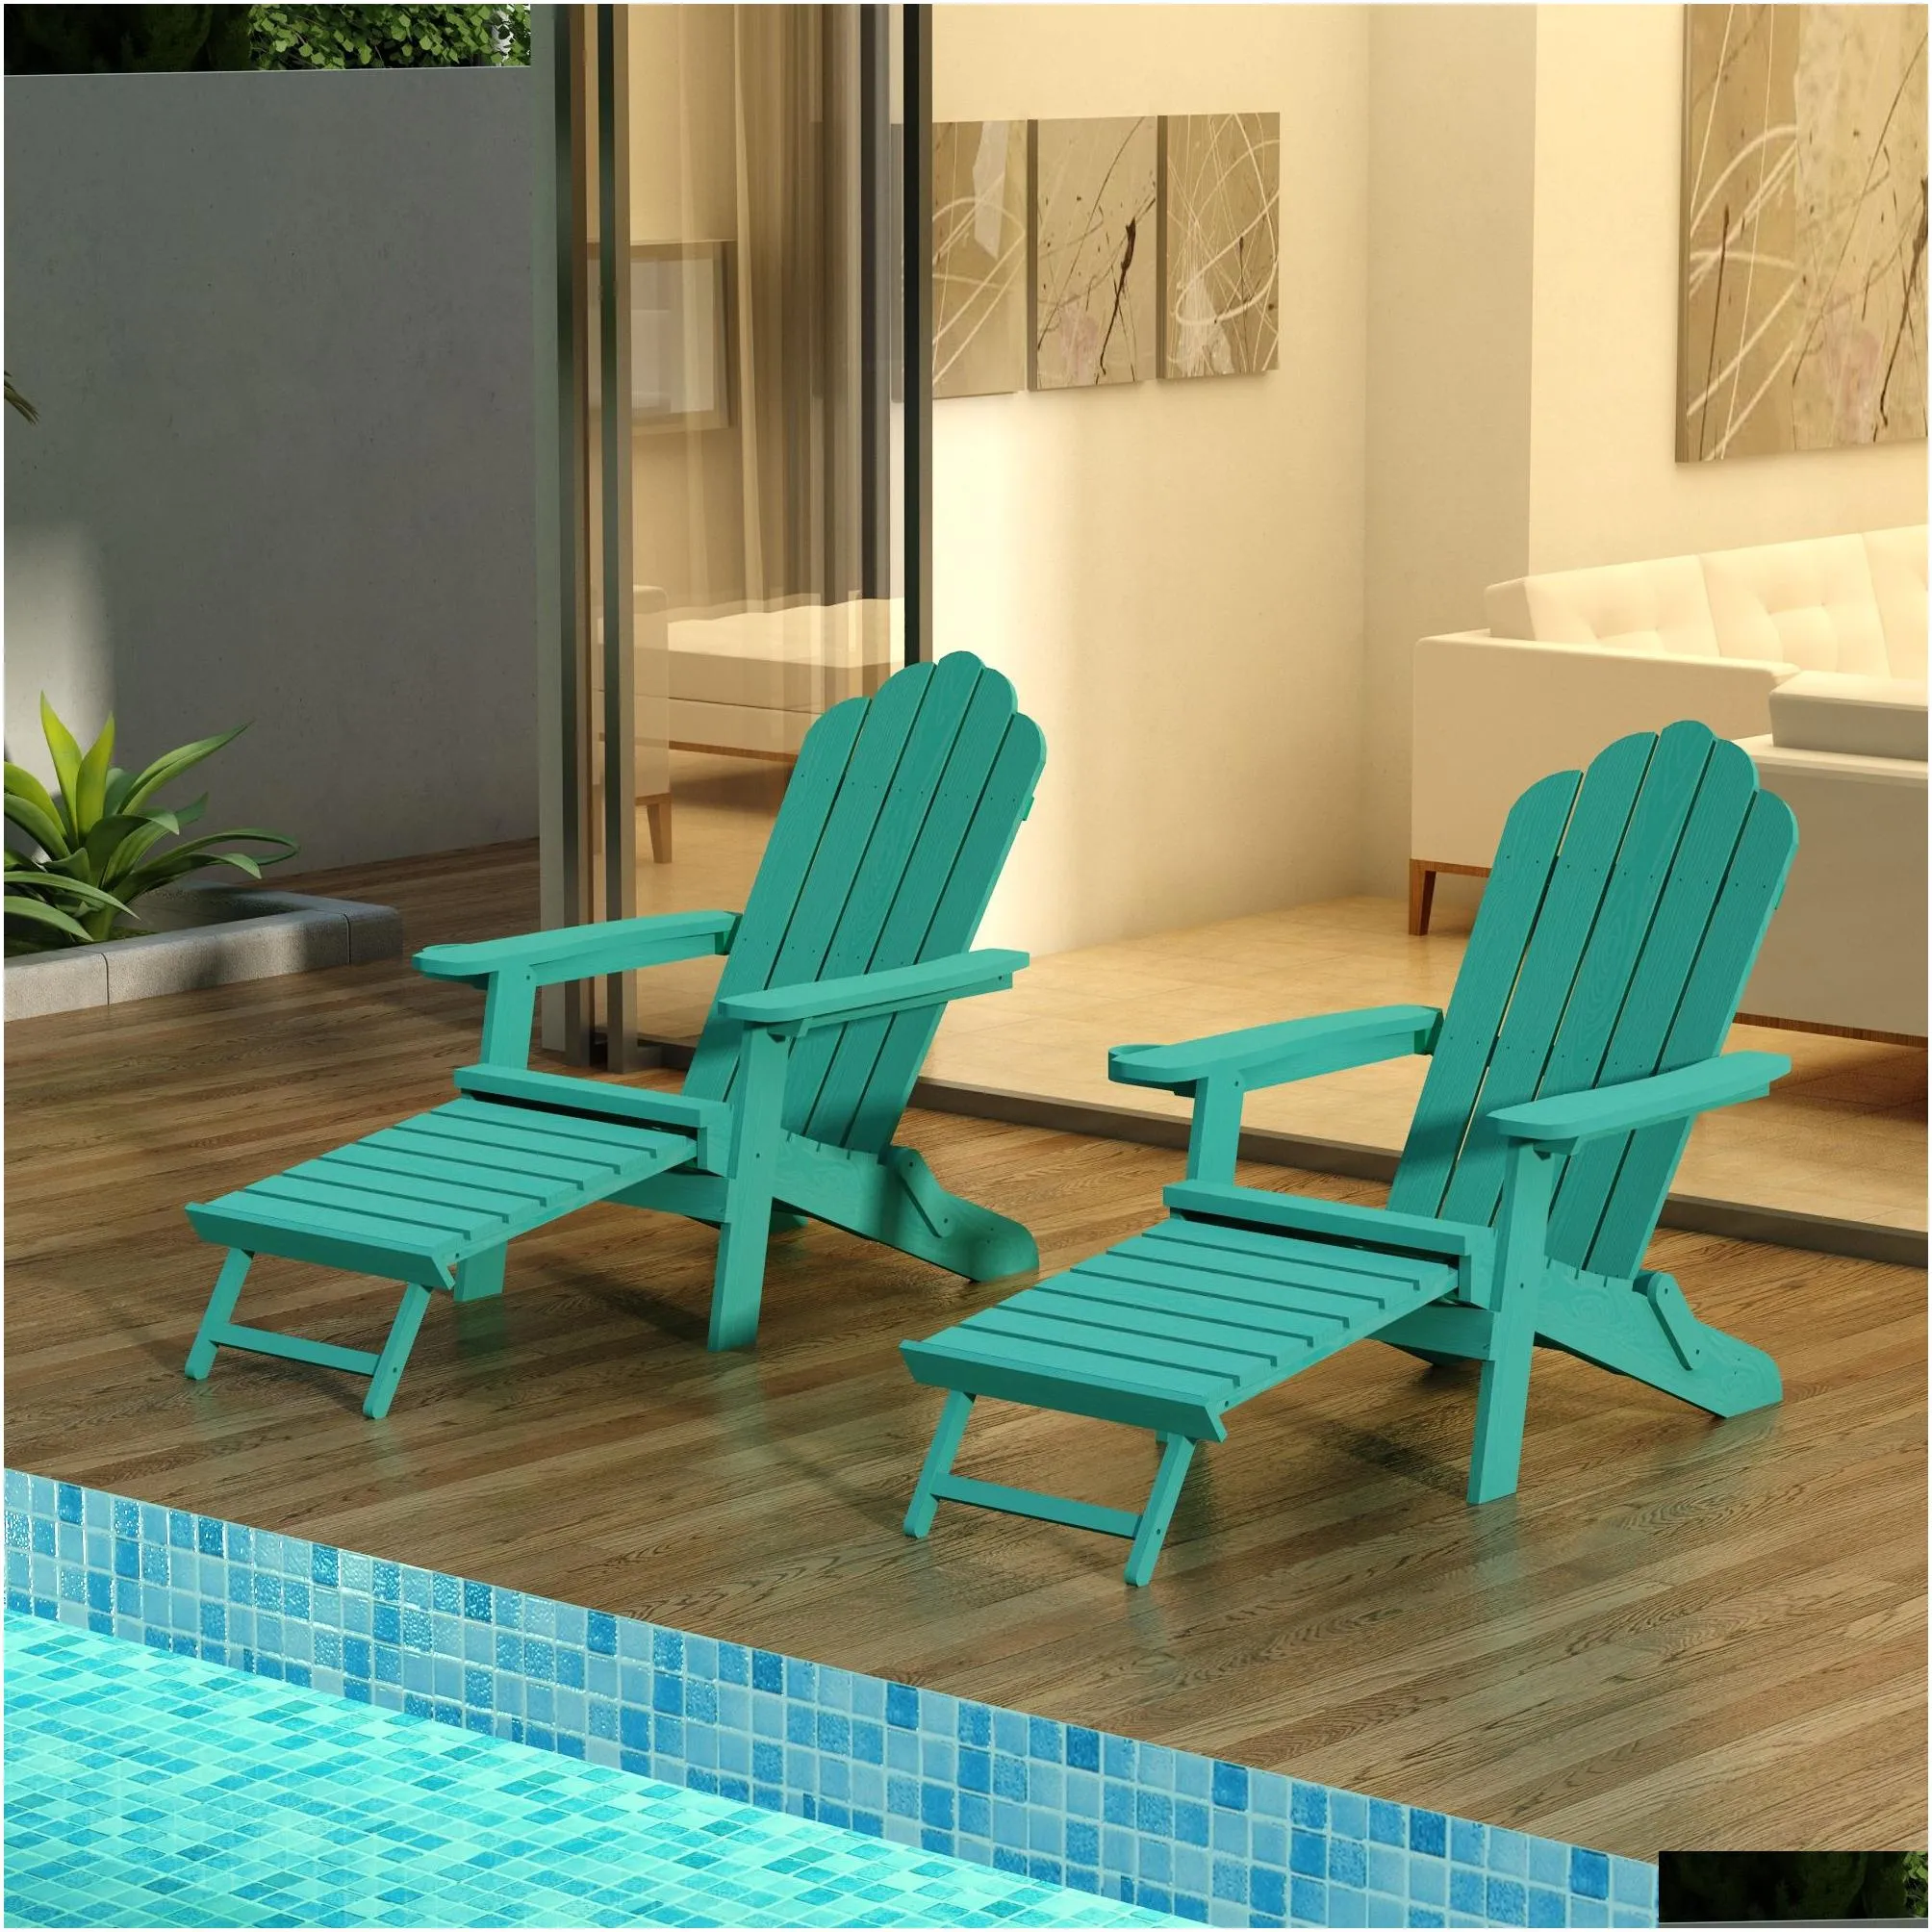 TALE Folding Adirondack Sleeper Chairs with Pullout Ottoman with Cup Holder Oversized, Poly Lumber, for Patio Deck Garden, Backyard